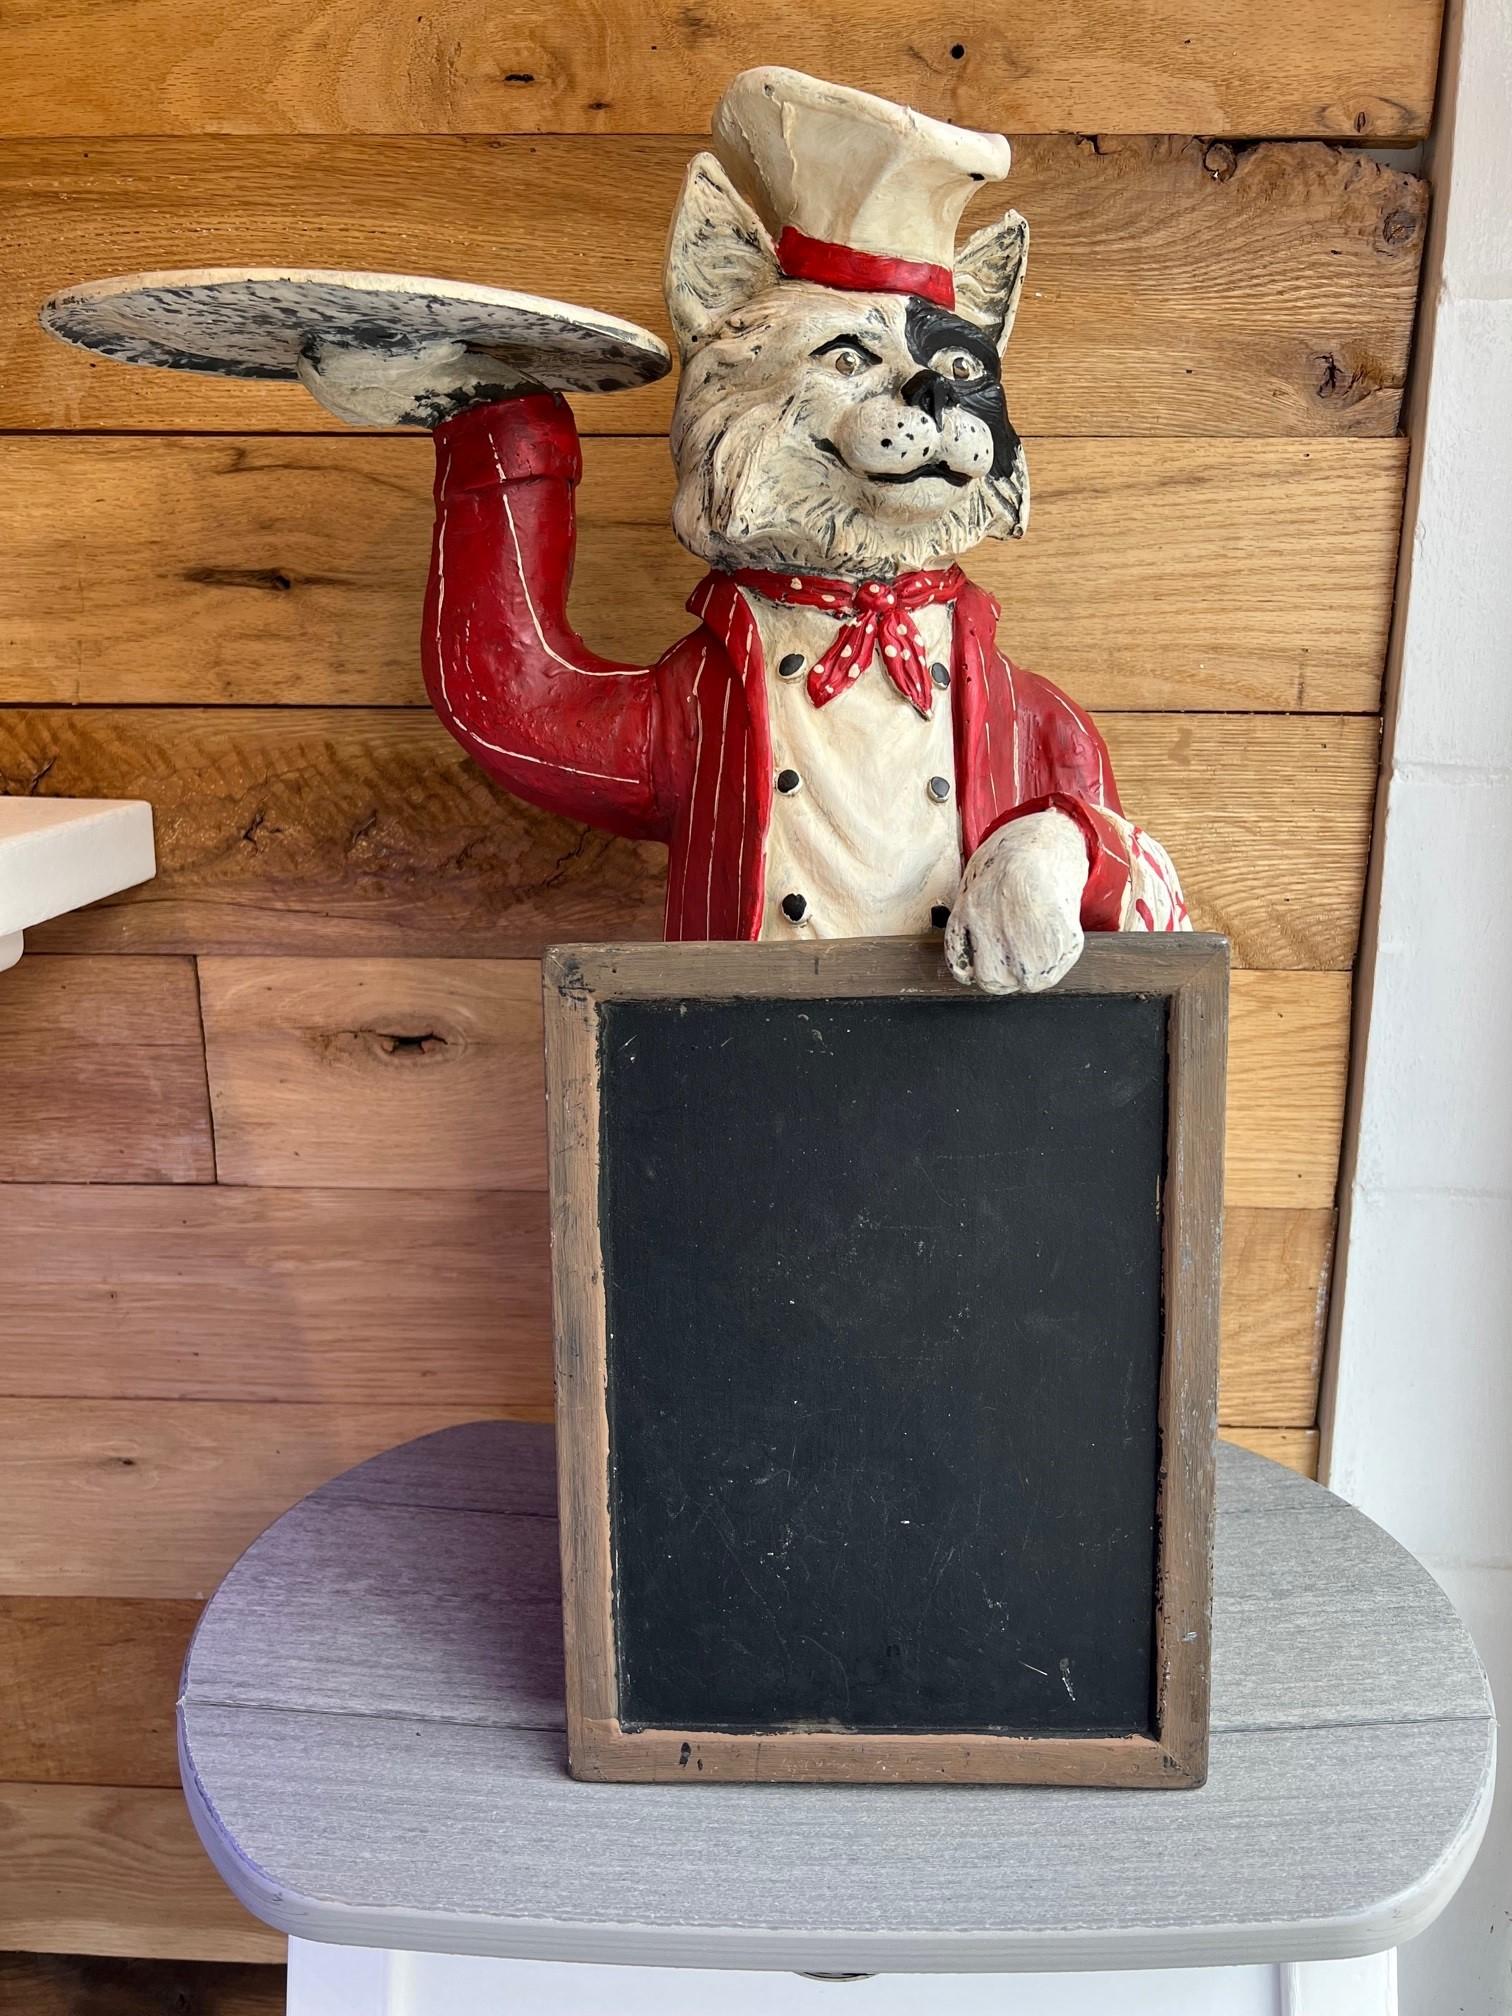 Rare Bill Huebbe Chef Cat with menu chalkboard signed HUEBBE 1992. This is a fun whimsical piece by Bill Huebbe made of fiberglass and hand painted. Bill was a creative artist who was known for his famous monkey chandeliers and his many chef animal